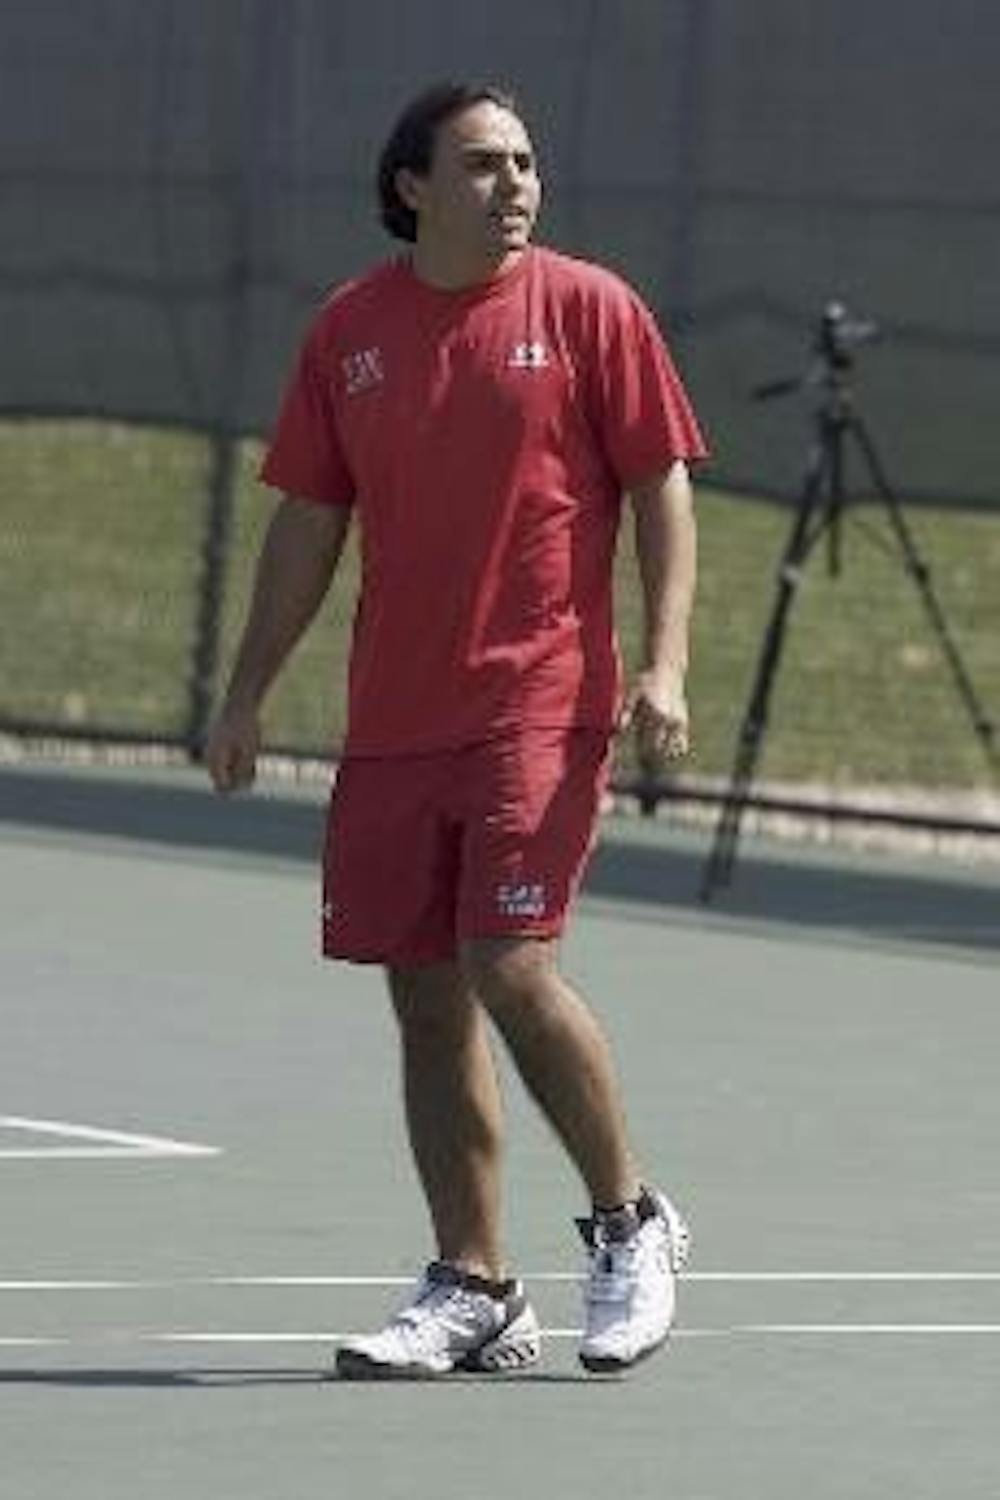 After former Head Coach Ray Reppert left the team to work in Florida, Assistant Head Coach Ricardo Rosas (above) took over the tennis program.